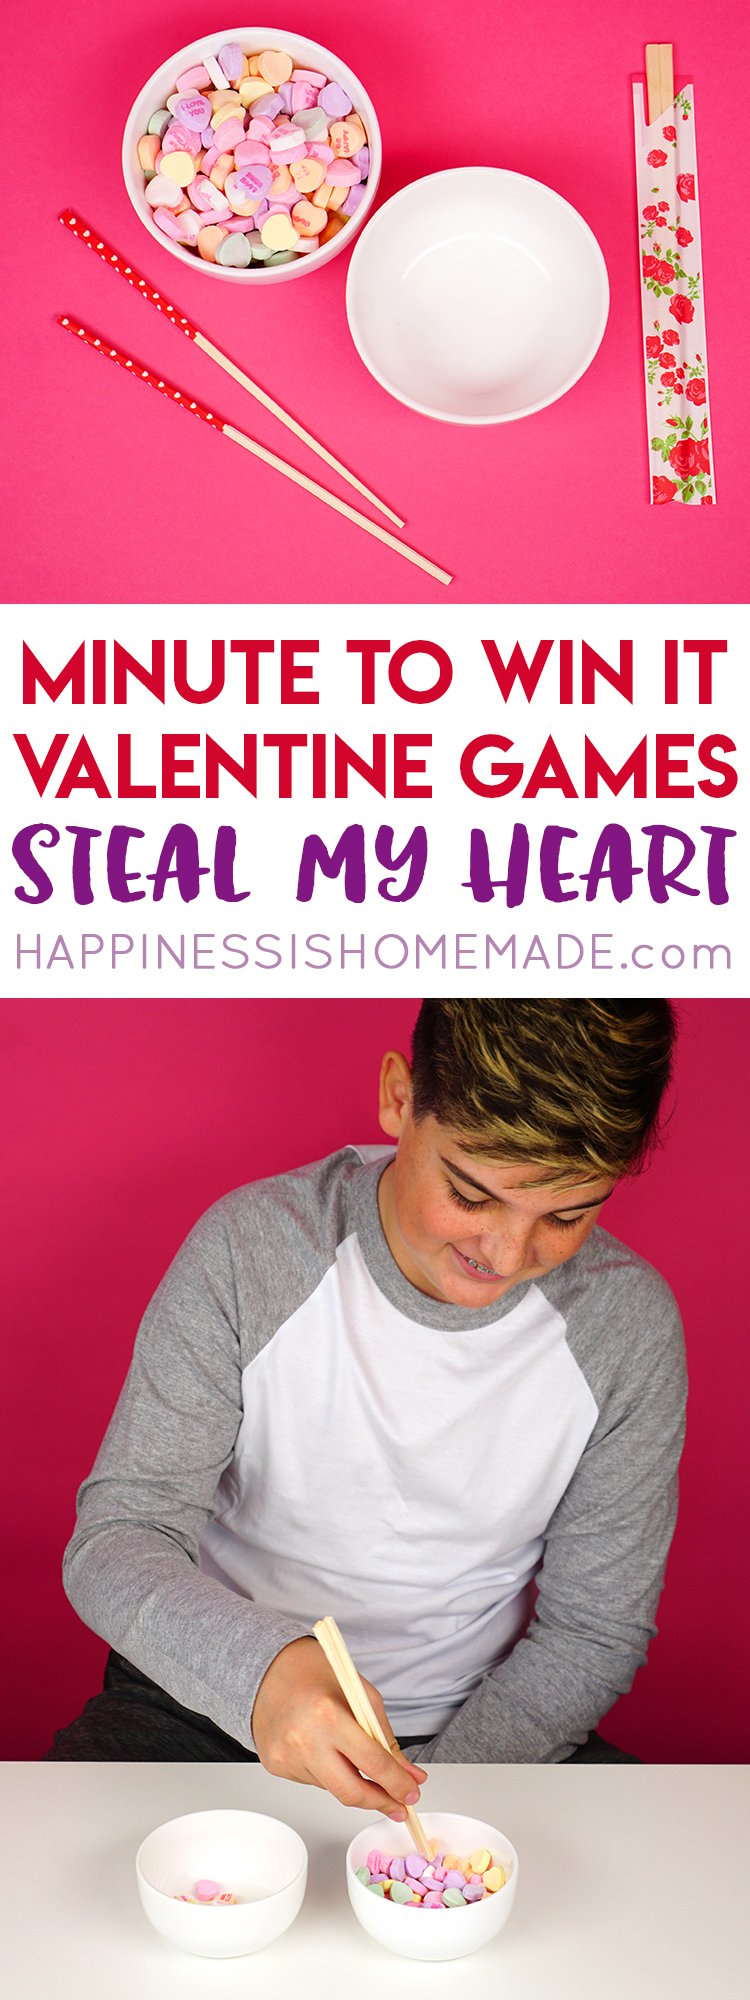 minute to win it valentine games steal my heart